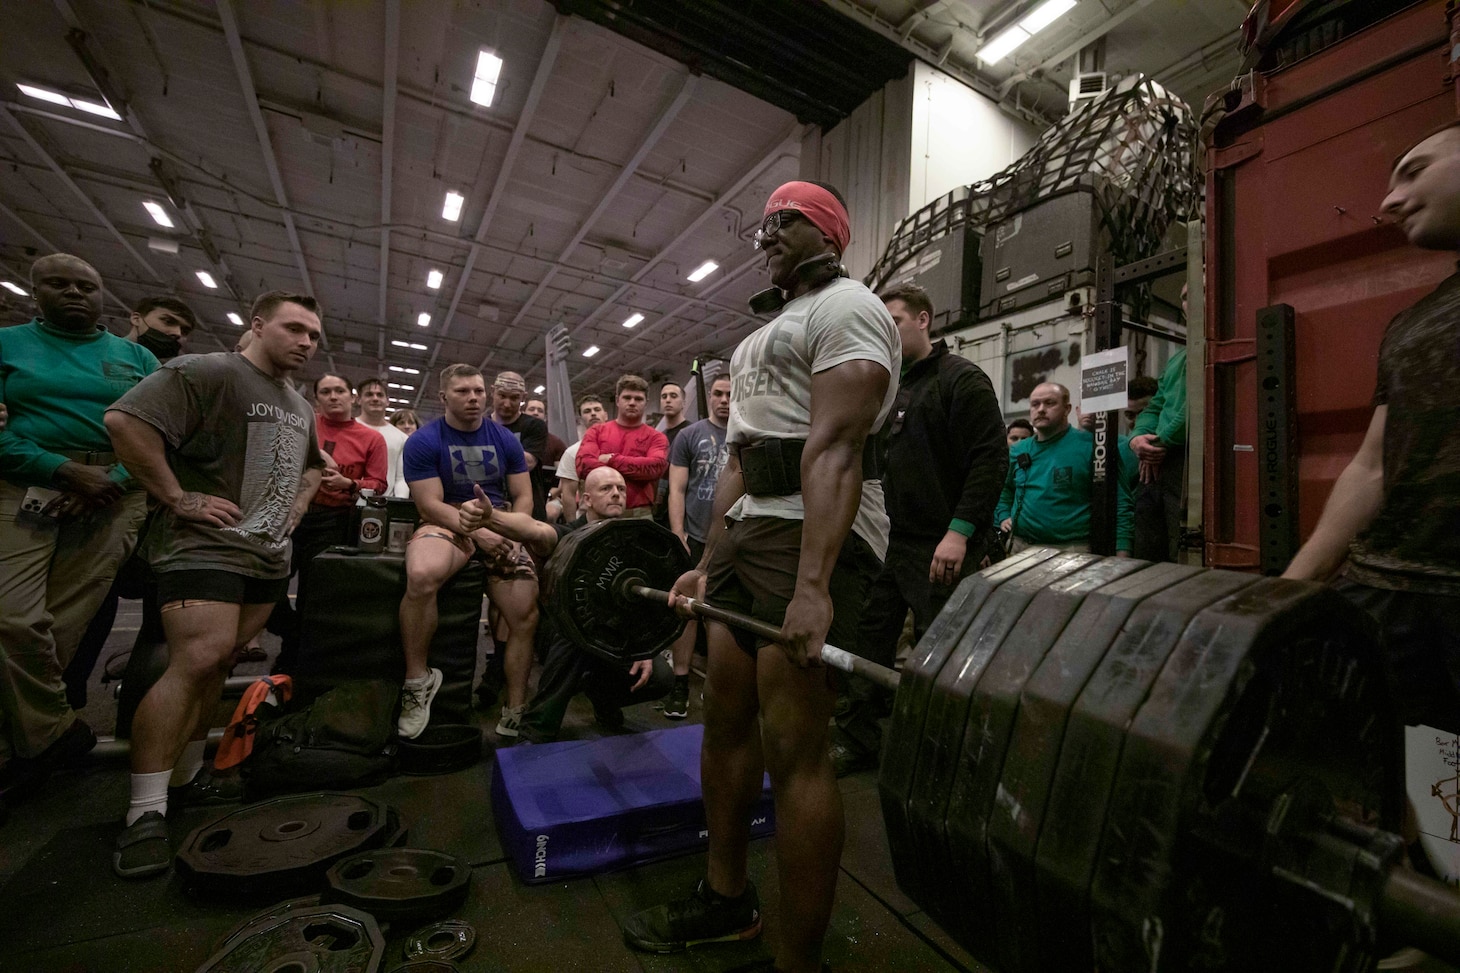 Chief Electrician's Mate Rubin Fletcher participates in a deadlifting competition hosted by the Morale, Welfare, and Recreation division in the hangar bay, Aug. 18, 2022.